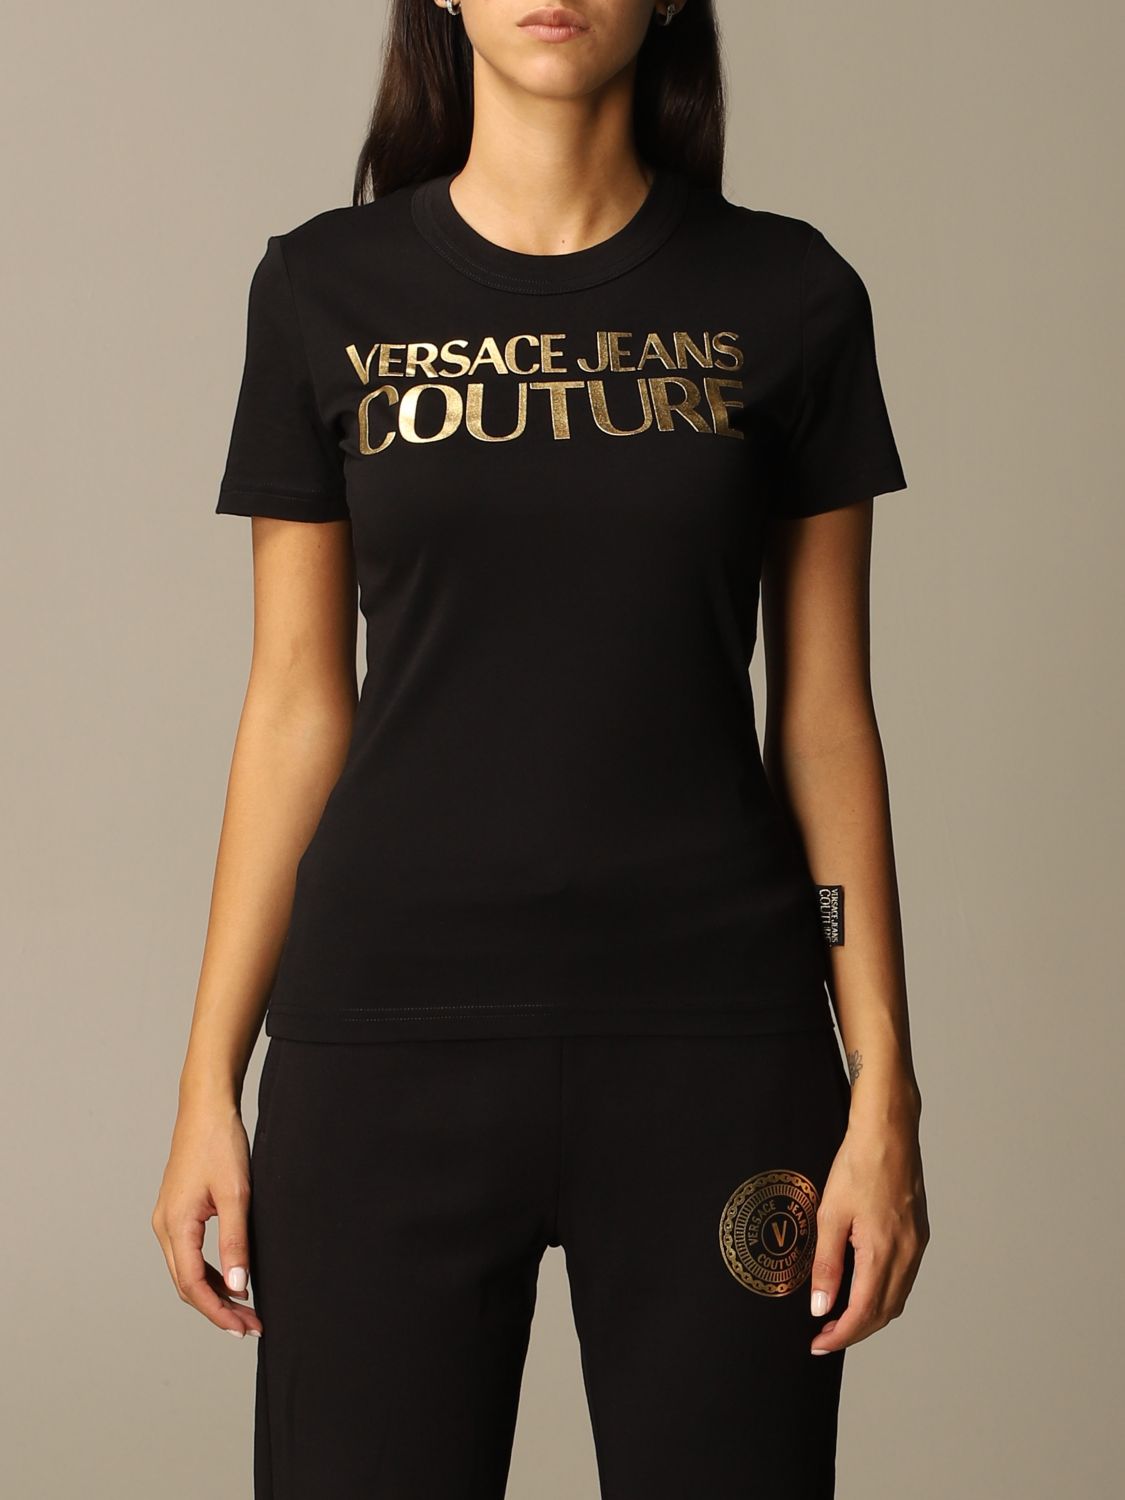 versace jeans couture t-shirt